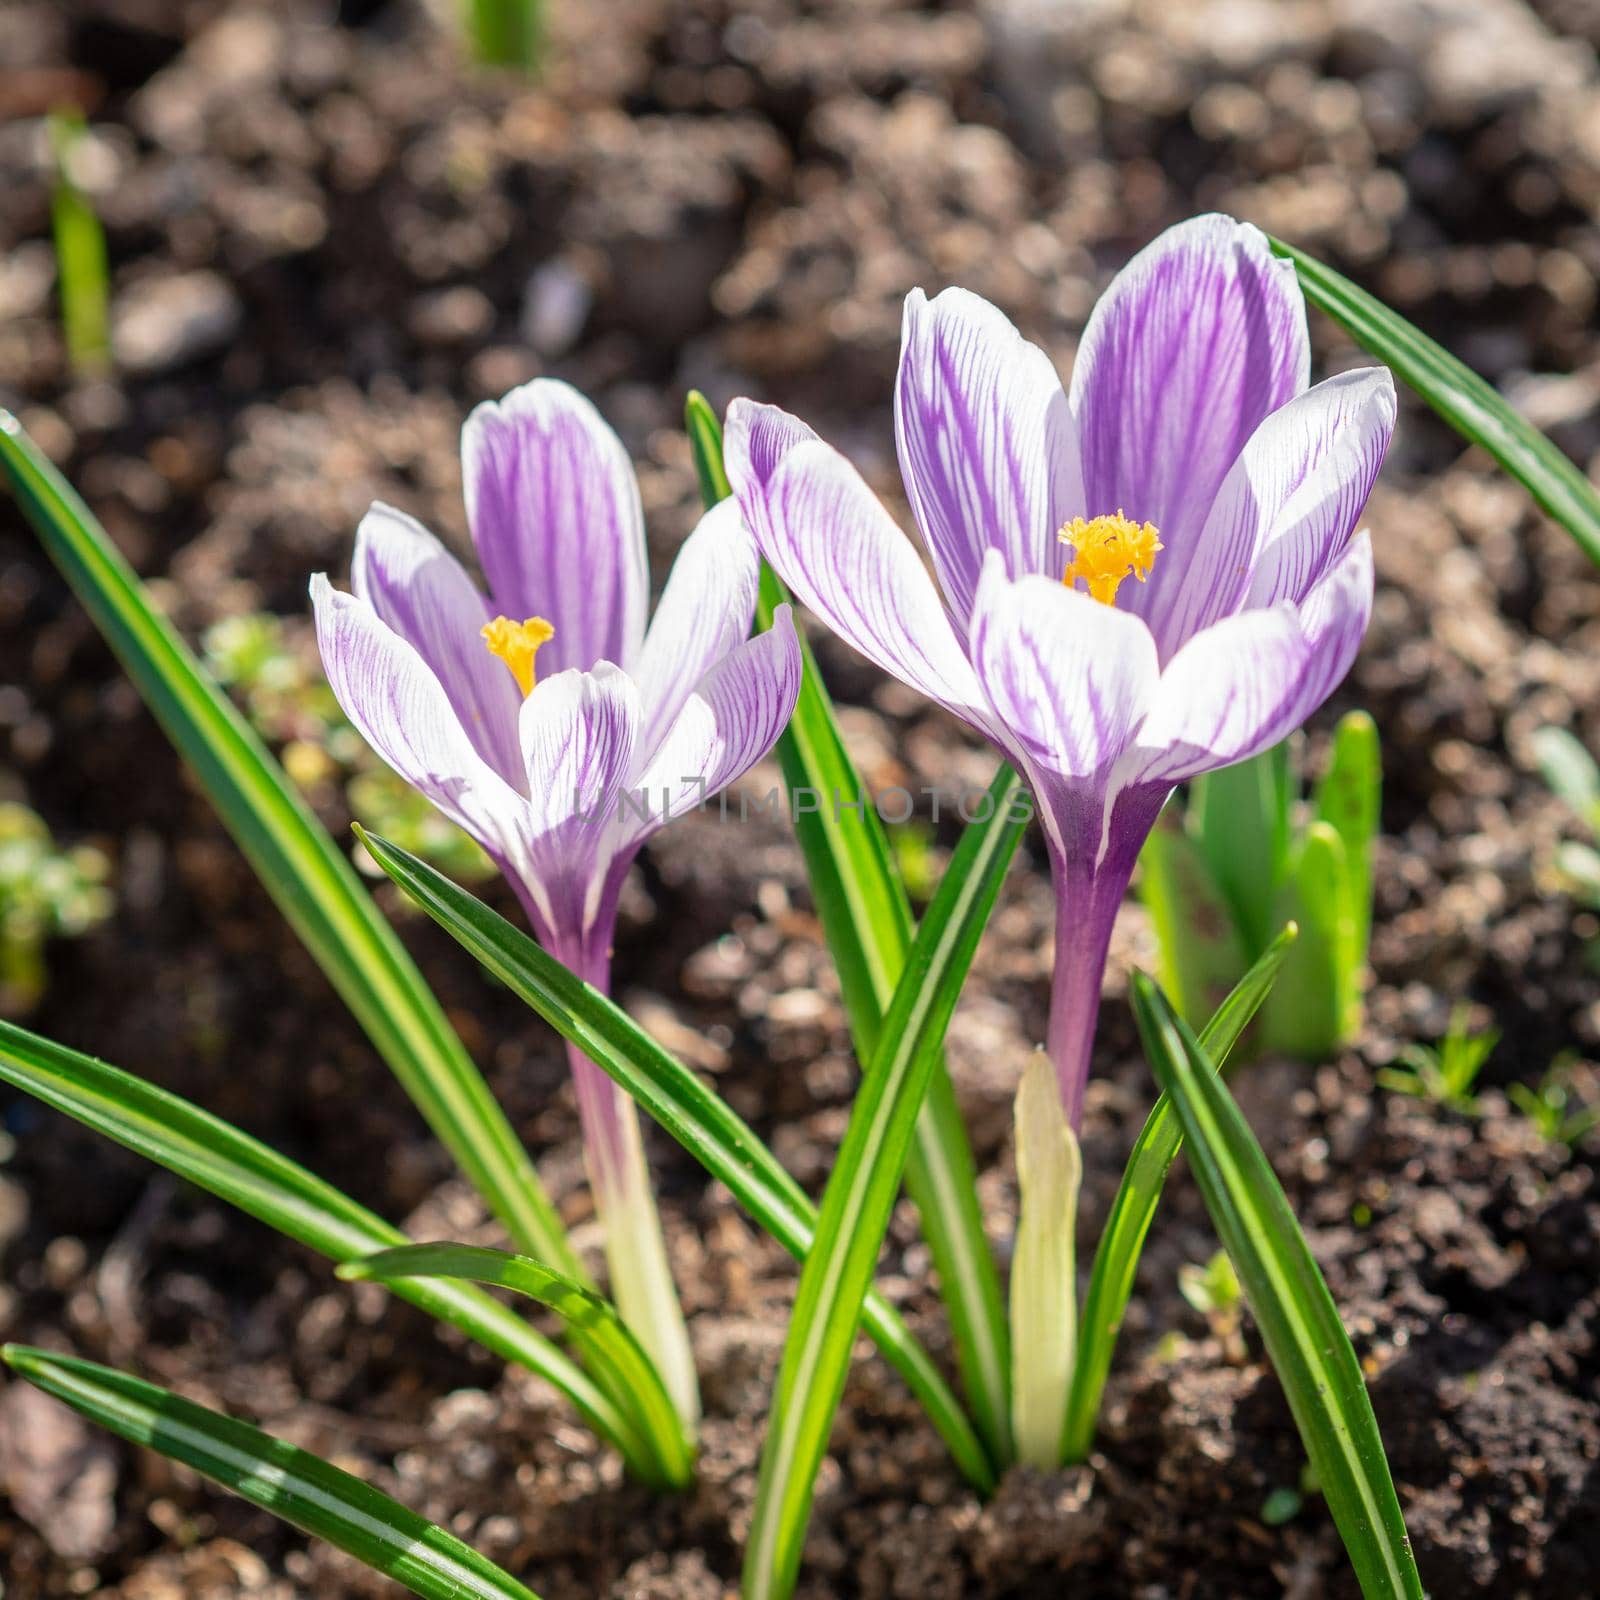 The spring awakening of nature, flowering of the first flowers, purple crocuses in sunlight by NataBene